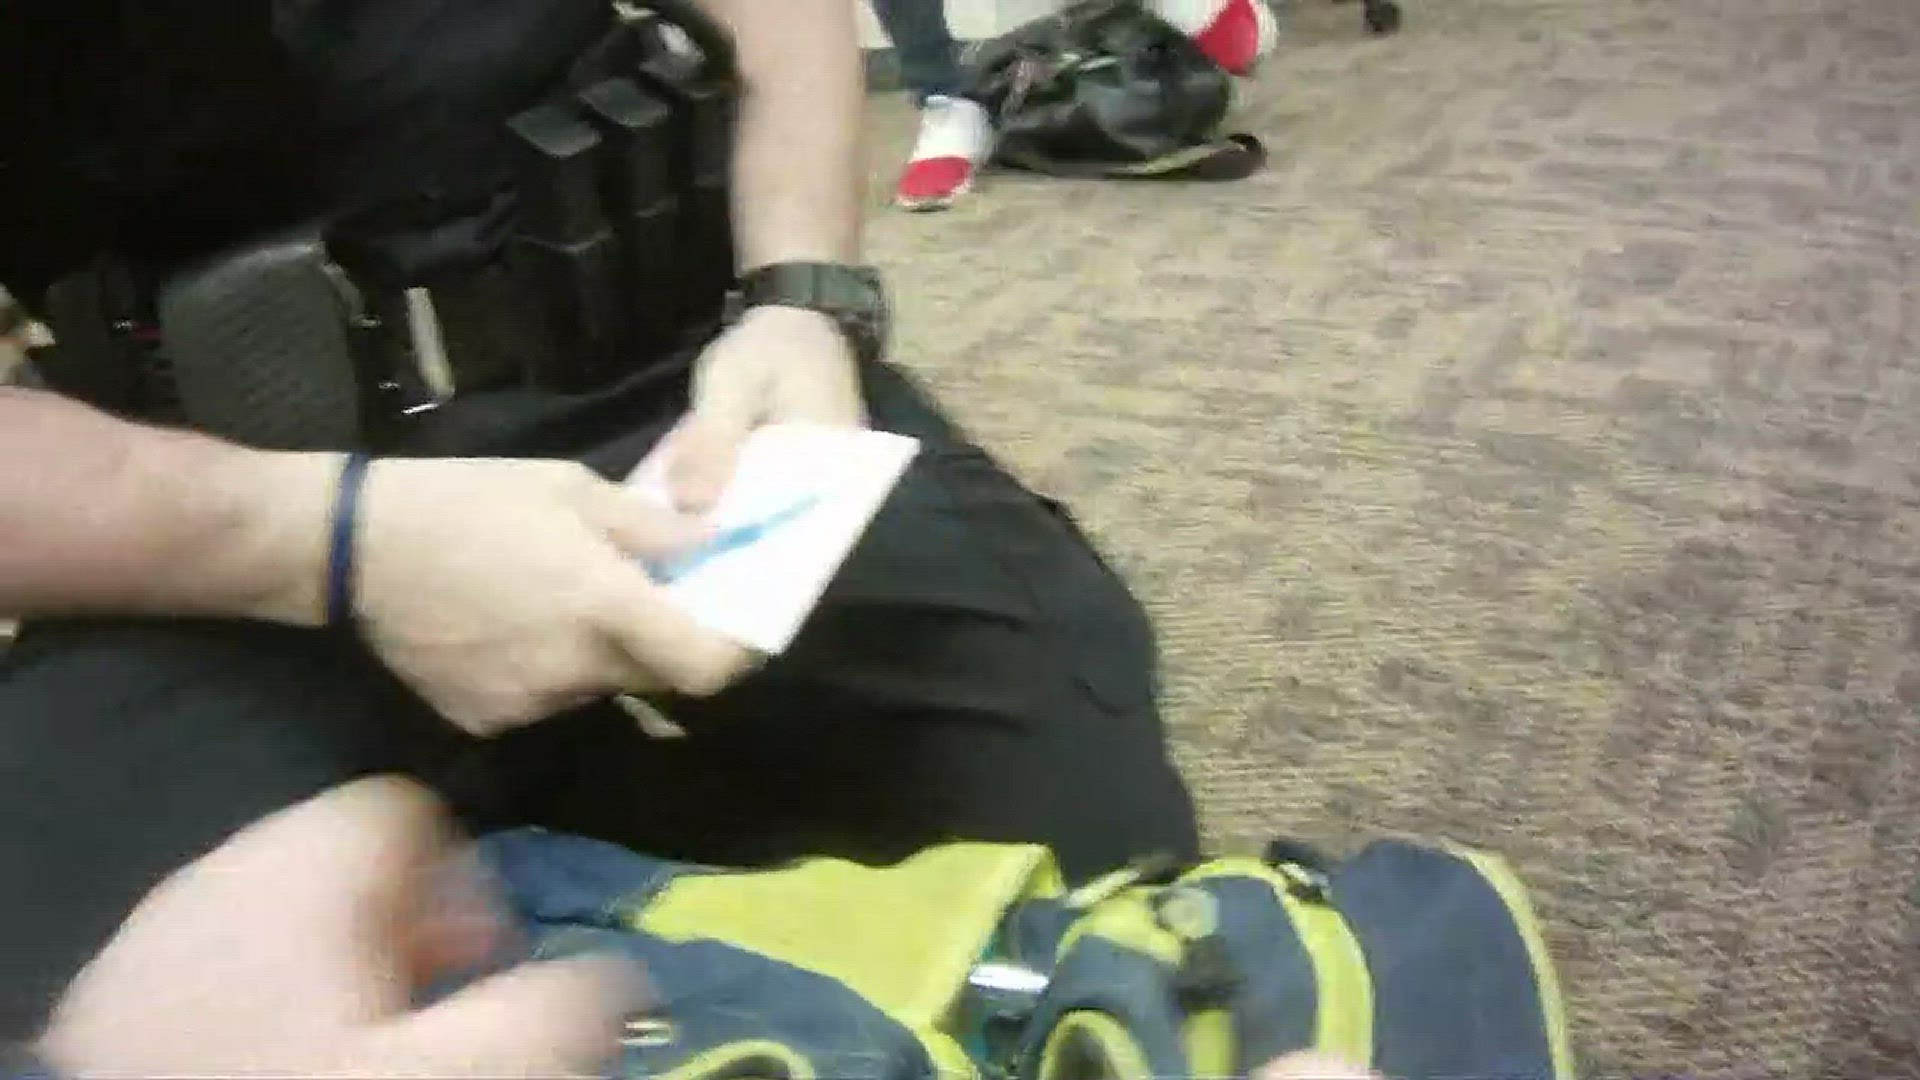 The Investigator: Euclid officer uses force on handcuffed girl